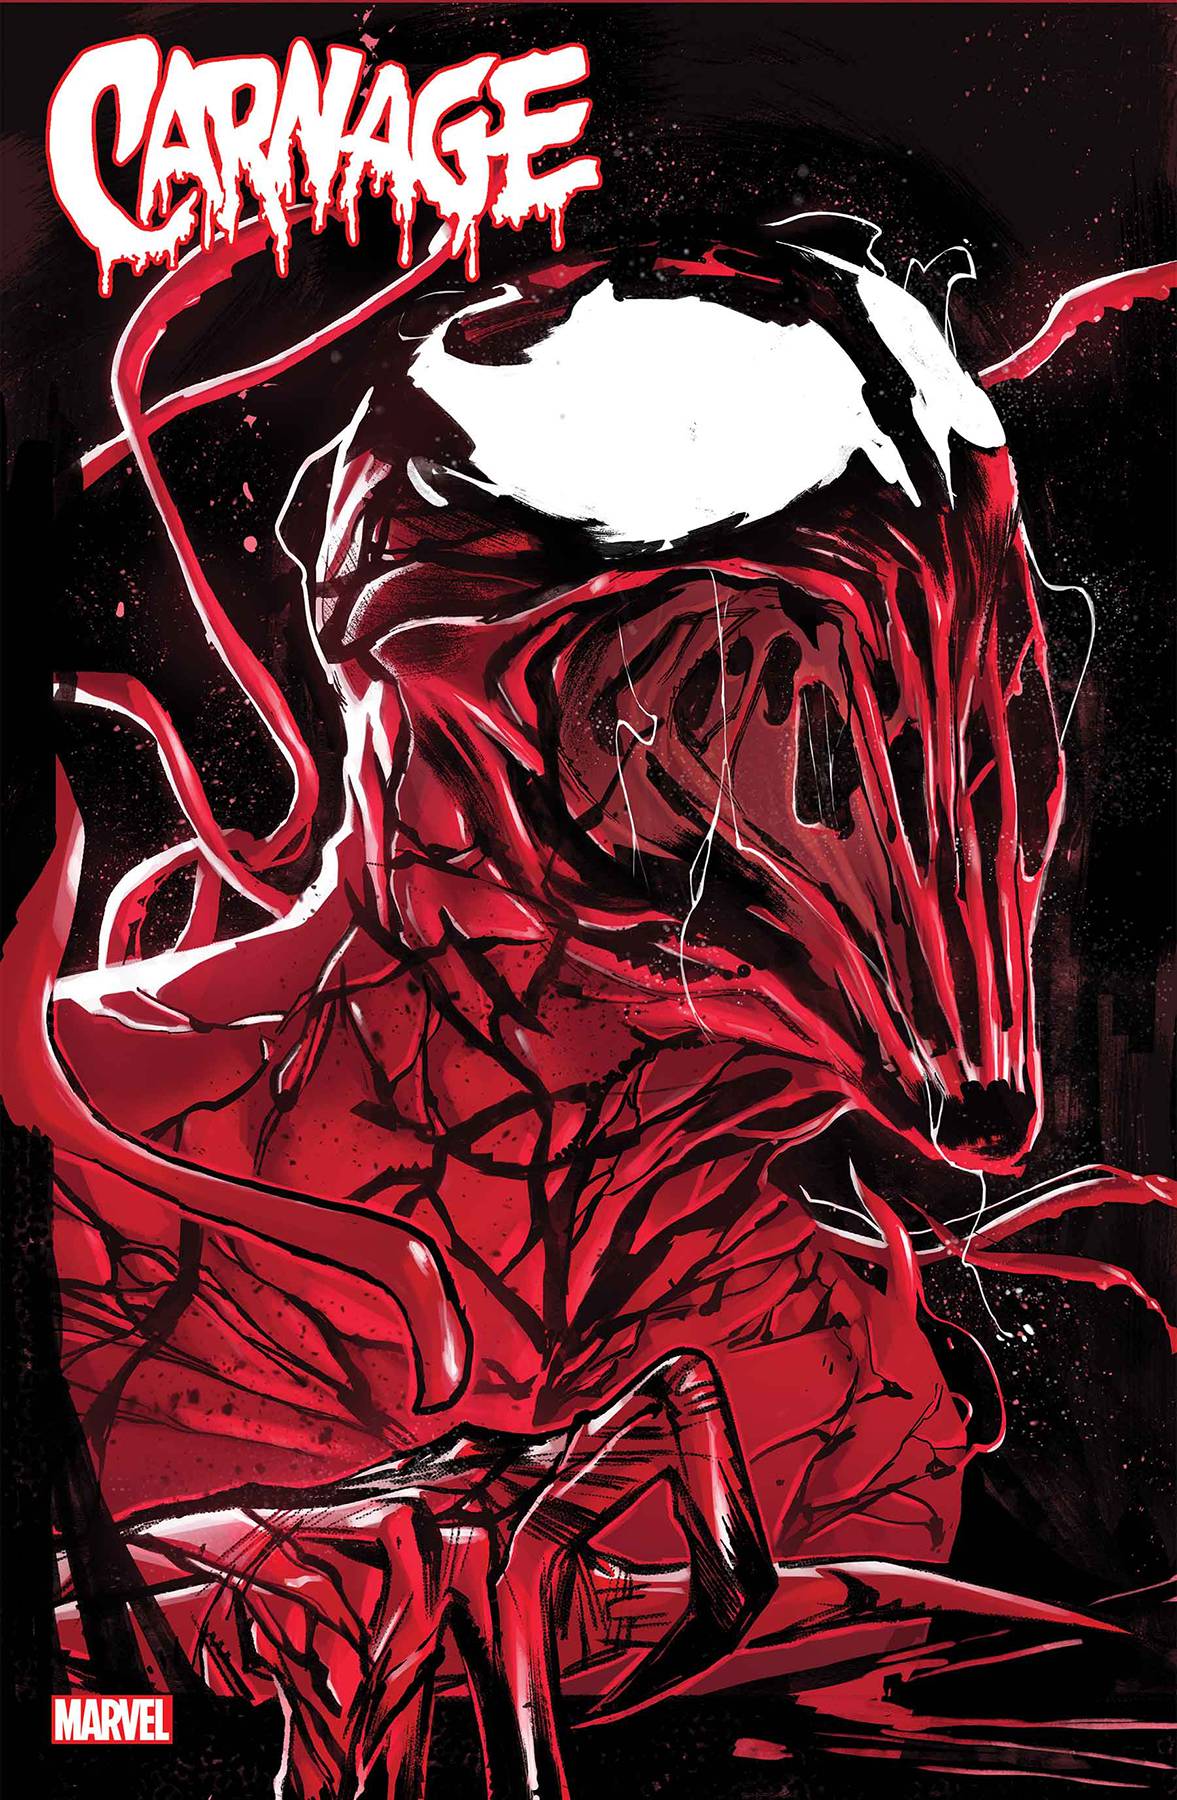 CARNAGE BLACK WHITE AND BLOOD #1 (OF 4) 03/24/21